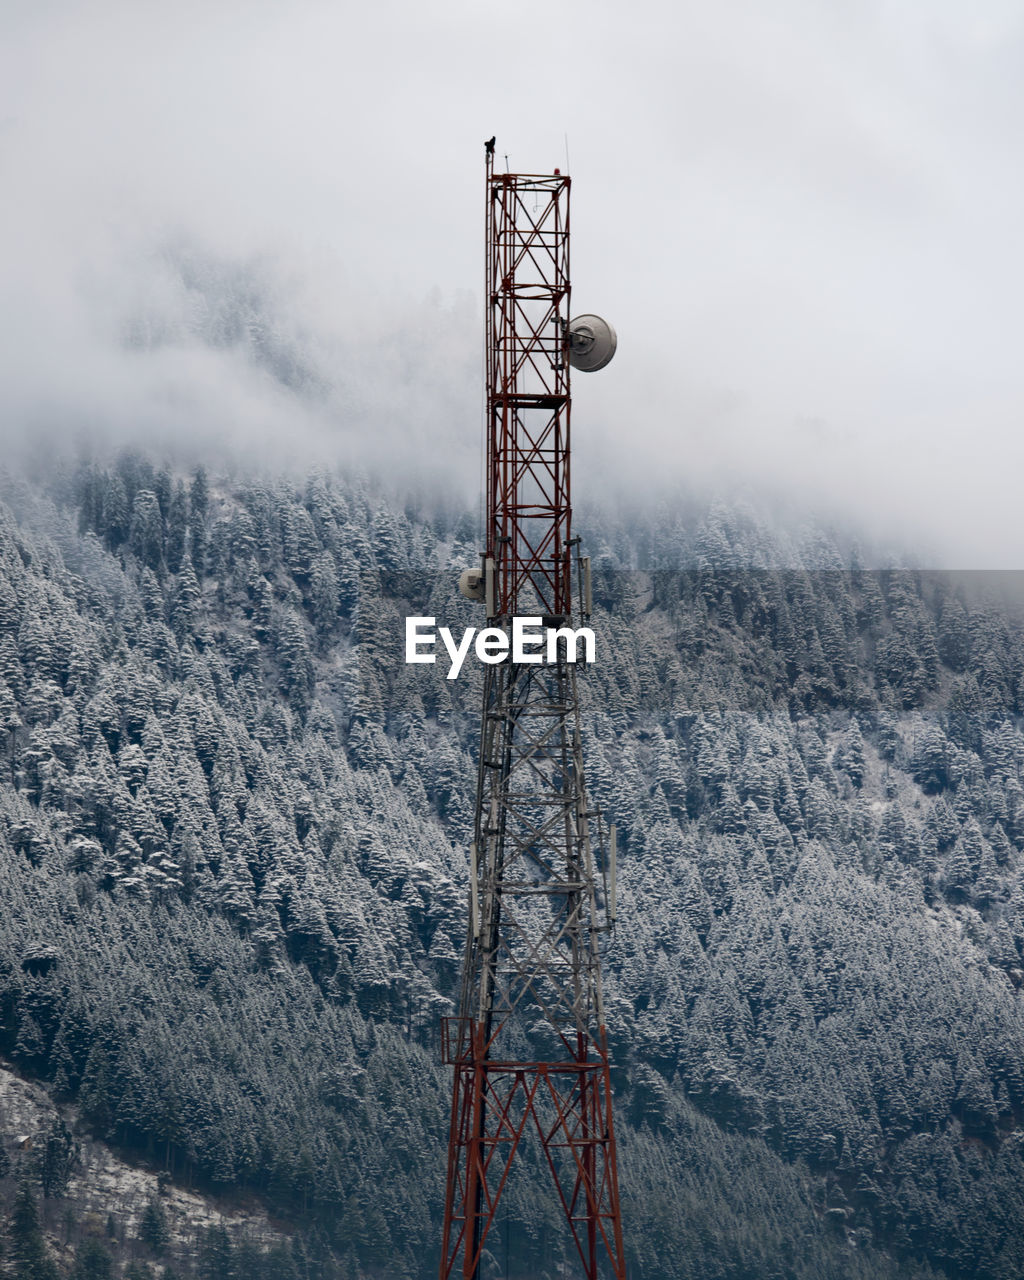 COMMUNICATIONS TOWER IN WINTER